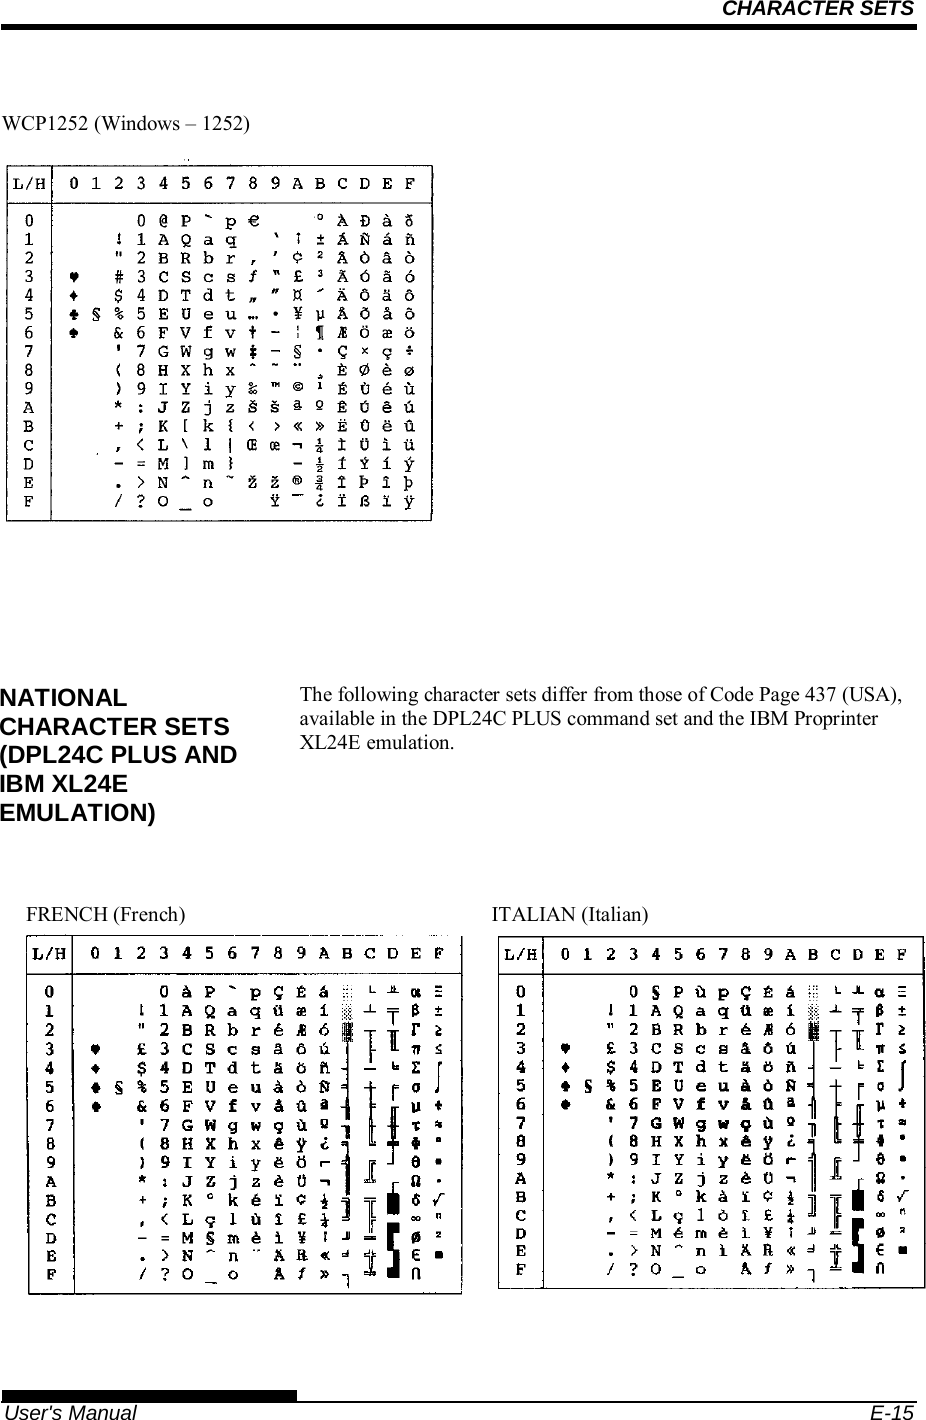 CHARACTER SETS    User&apos;s Manual  E-15               The following character sets differ from those of Code Page 437 (USA), available in the DPL24C PLUS command set and the IBM Proprinter XL24E emulation.                NATIONAL CHARACTER SETS (DPL24C PLUS AND IBM XL24E EMULATION) FRENCH (French)  ITALIAN (Italian) WCP1252 (Windows –1252)   